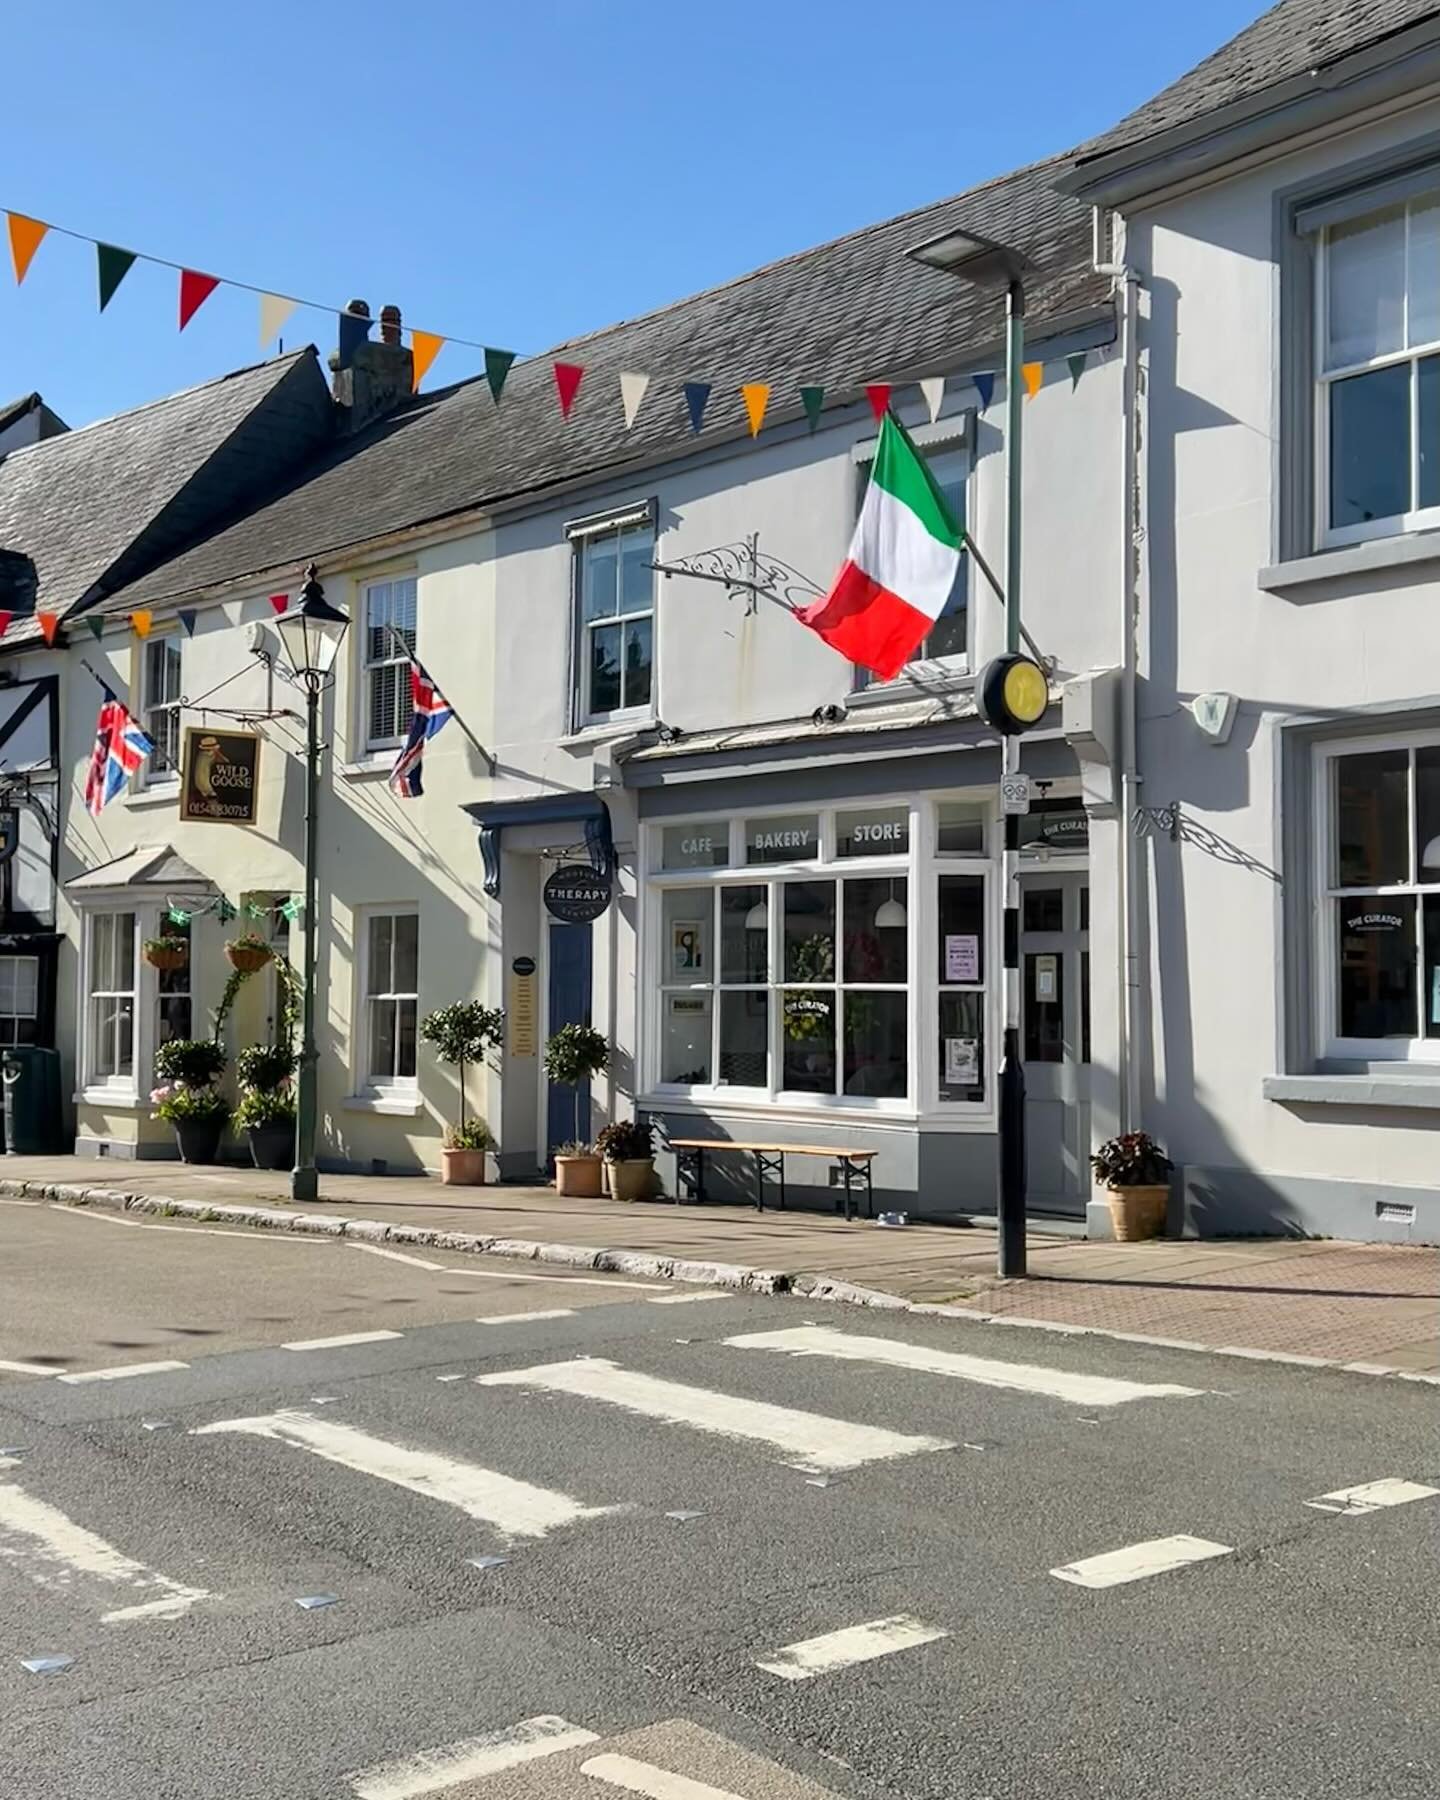 Modbury May Fair!

It&rsquo;s the beginning of the annual Modbury May Fair, which sees a range of events taking place across the town for a week. Today there&rsquo;s a market in Poundwell car park, an art exhibition and a carnival procession in the e